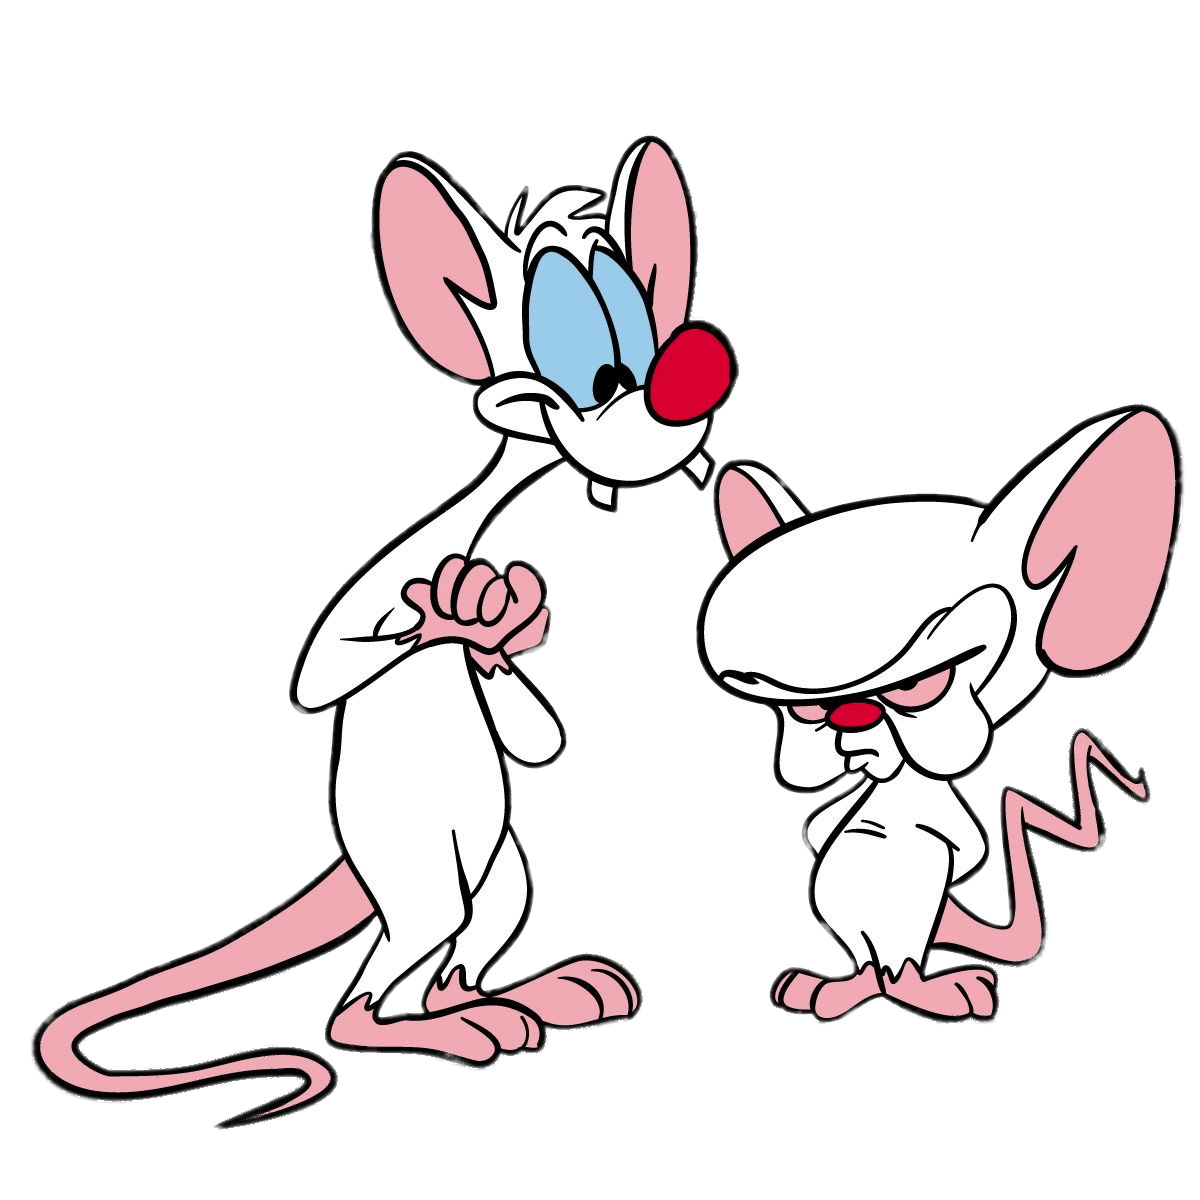 Check out this transparent Pinky and The Brain PNG image